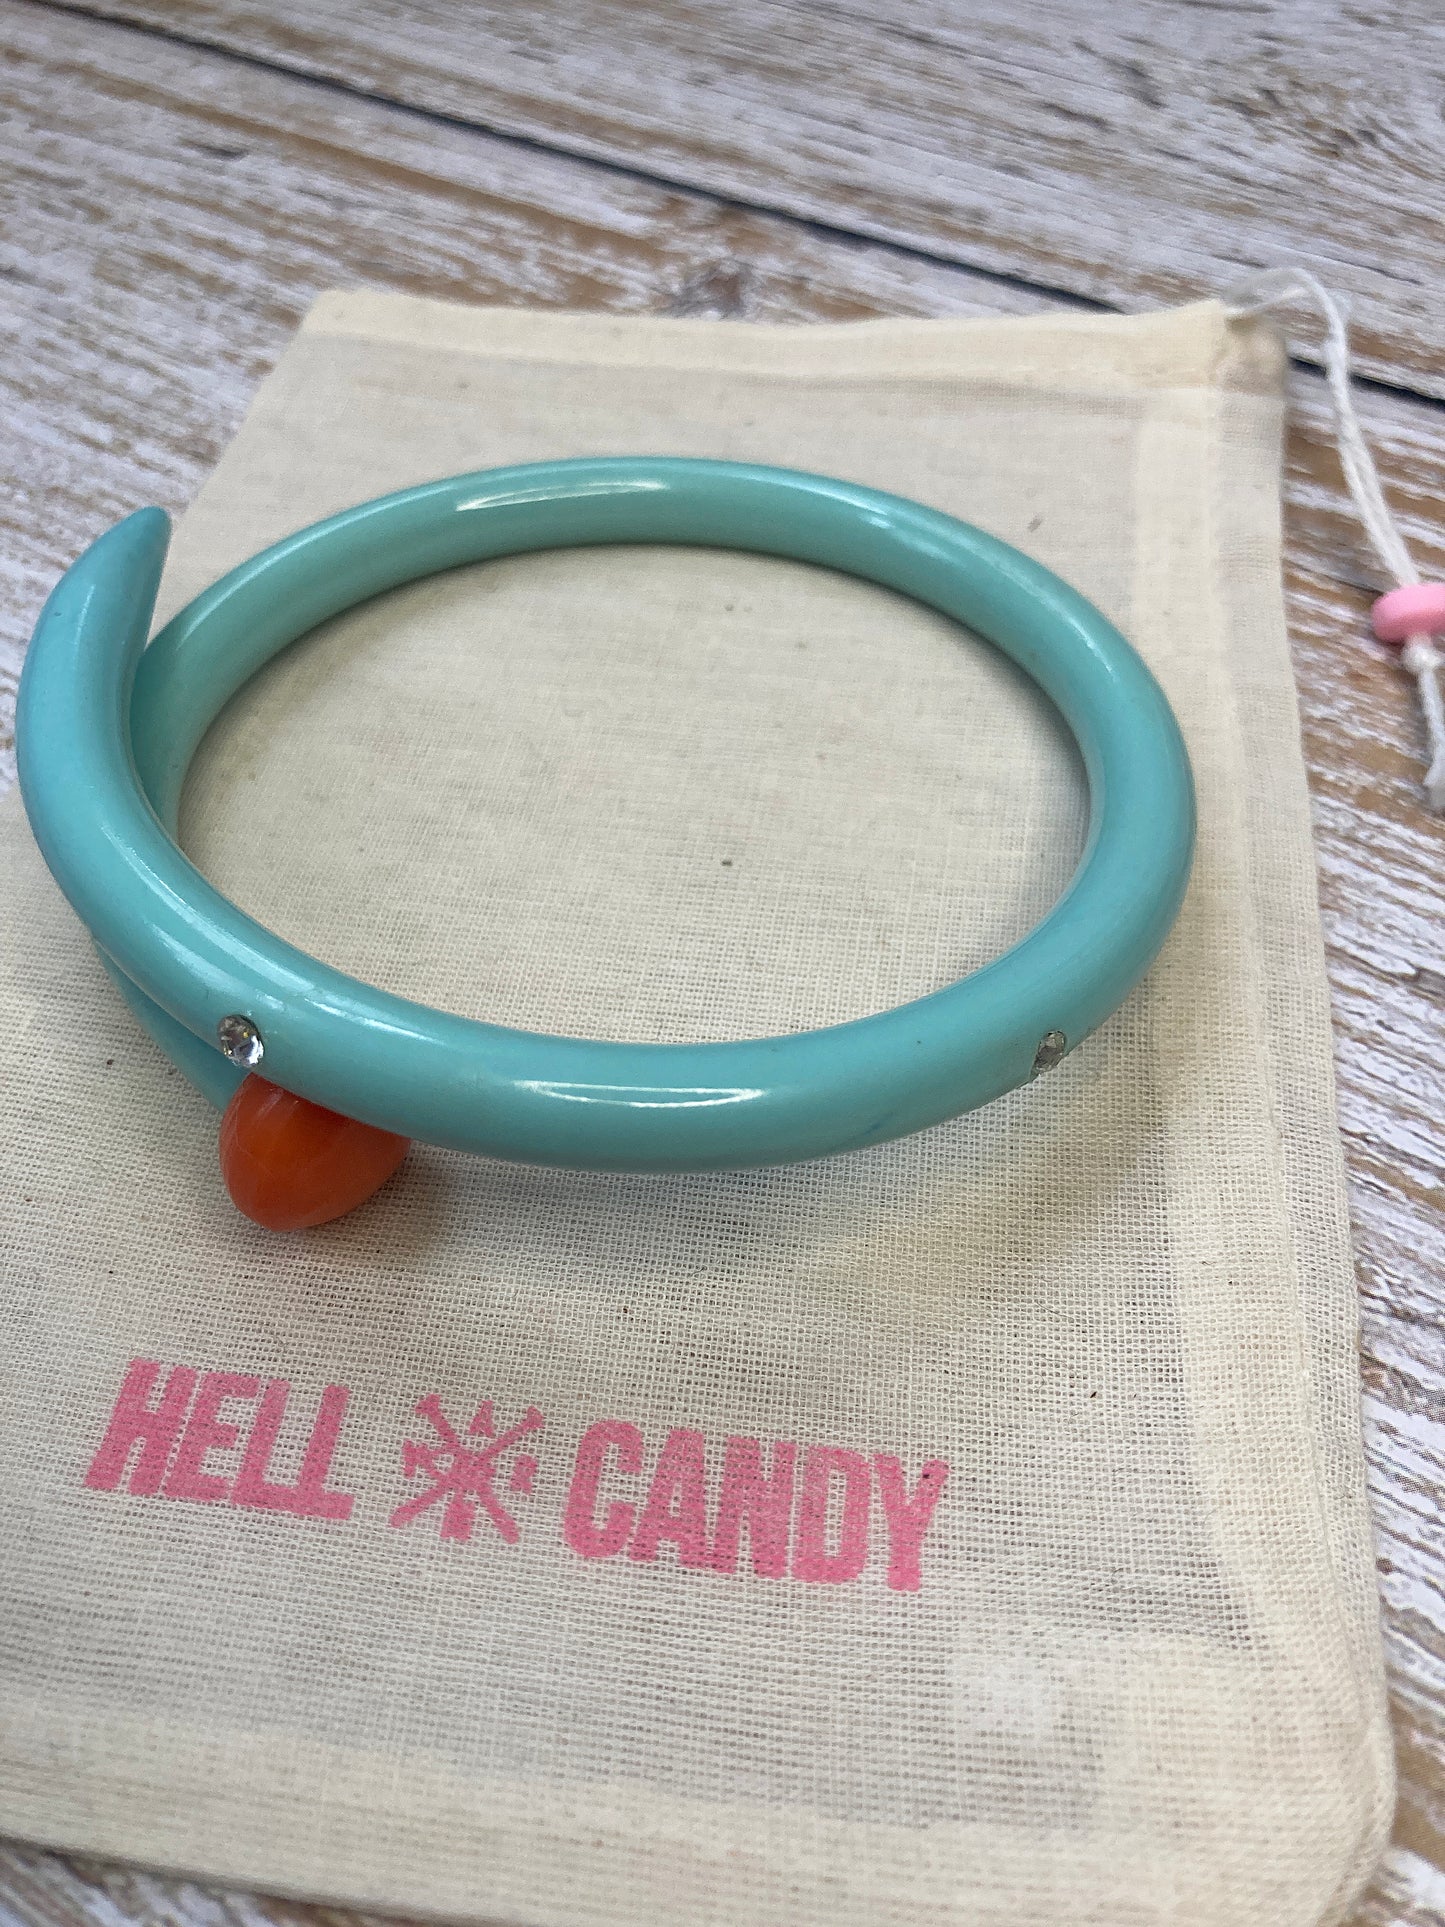 Hellcandy Vintage Knitting Bangle - pale blue with clear diamante crystals